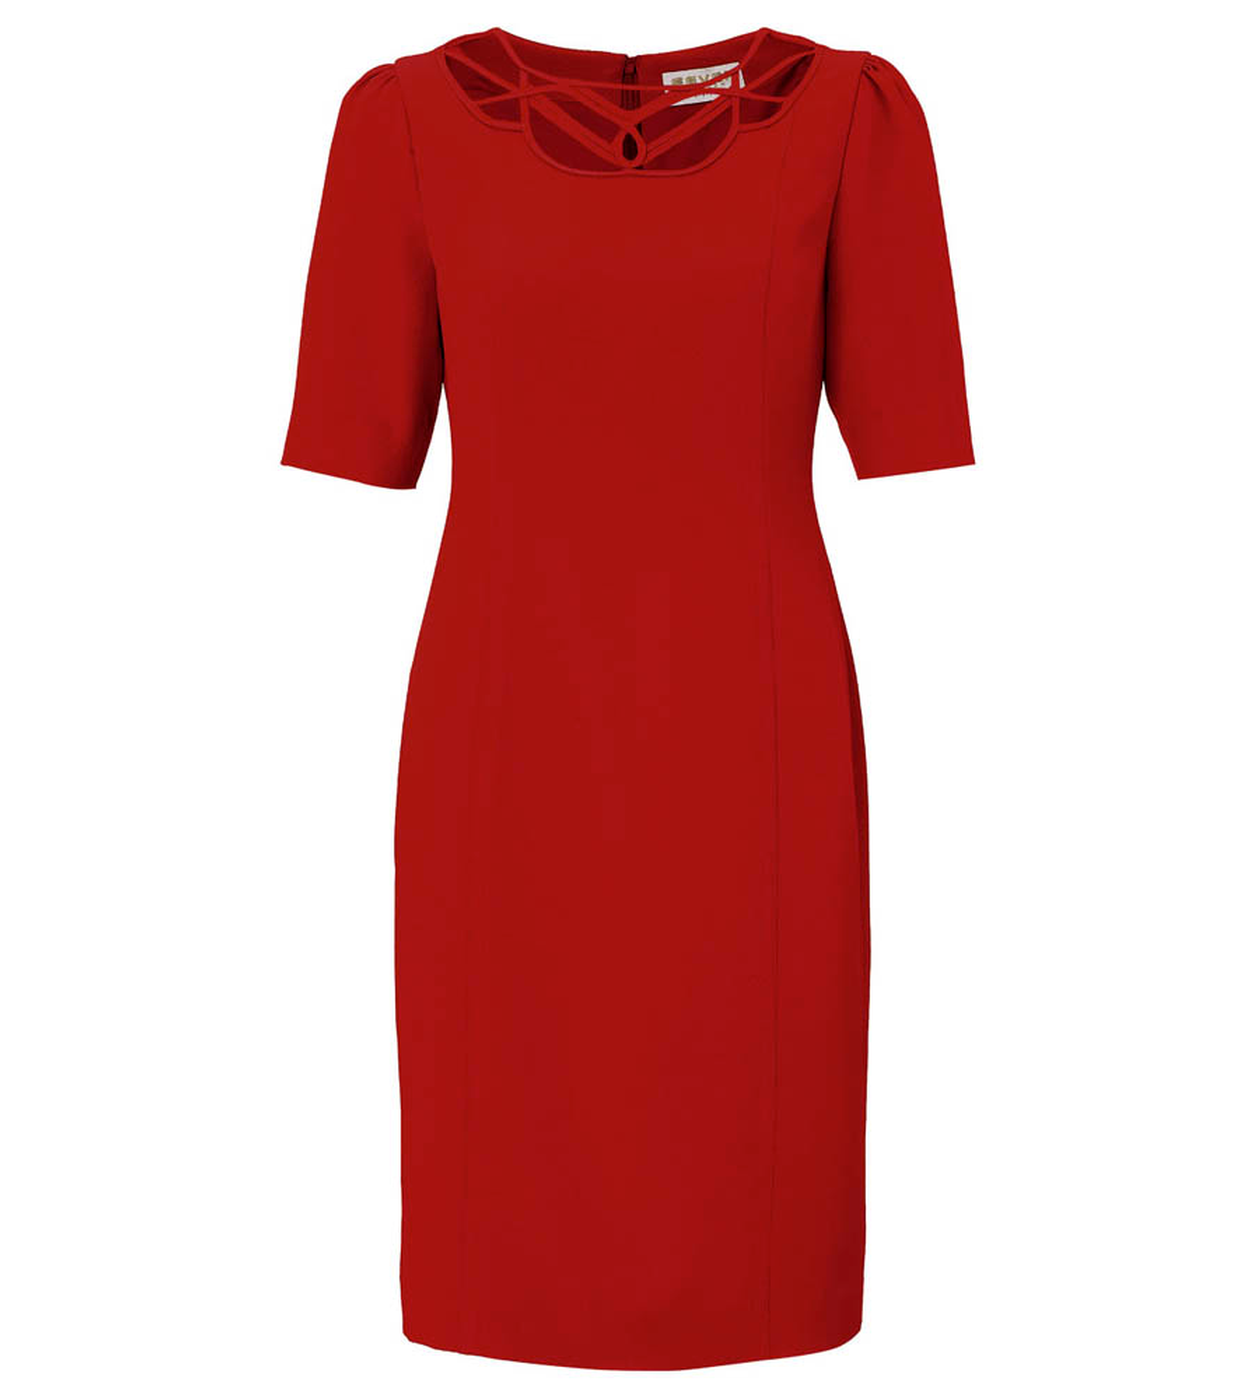 Fever London Frances Retro 40s Vintage style Party Dress in Red